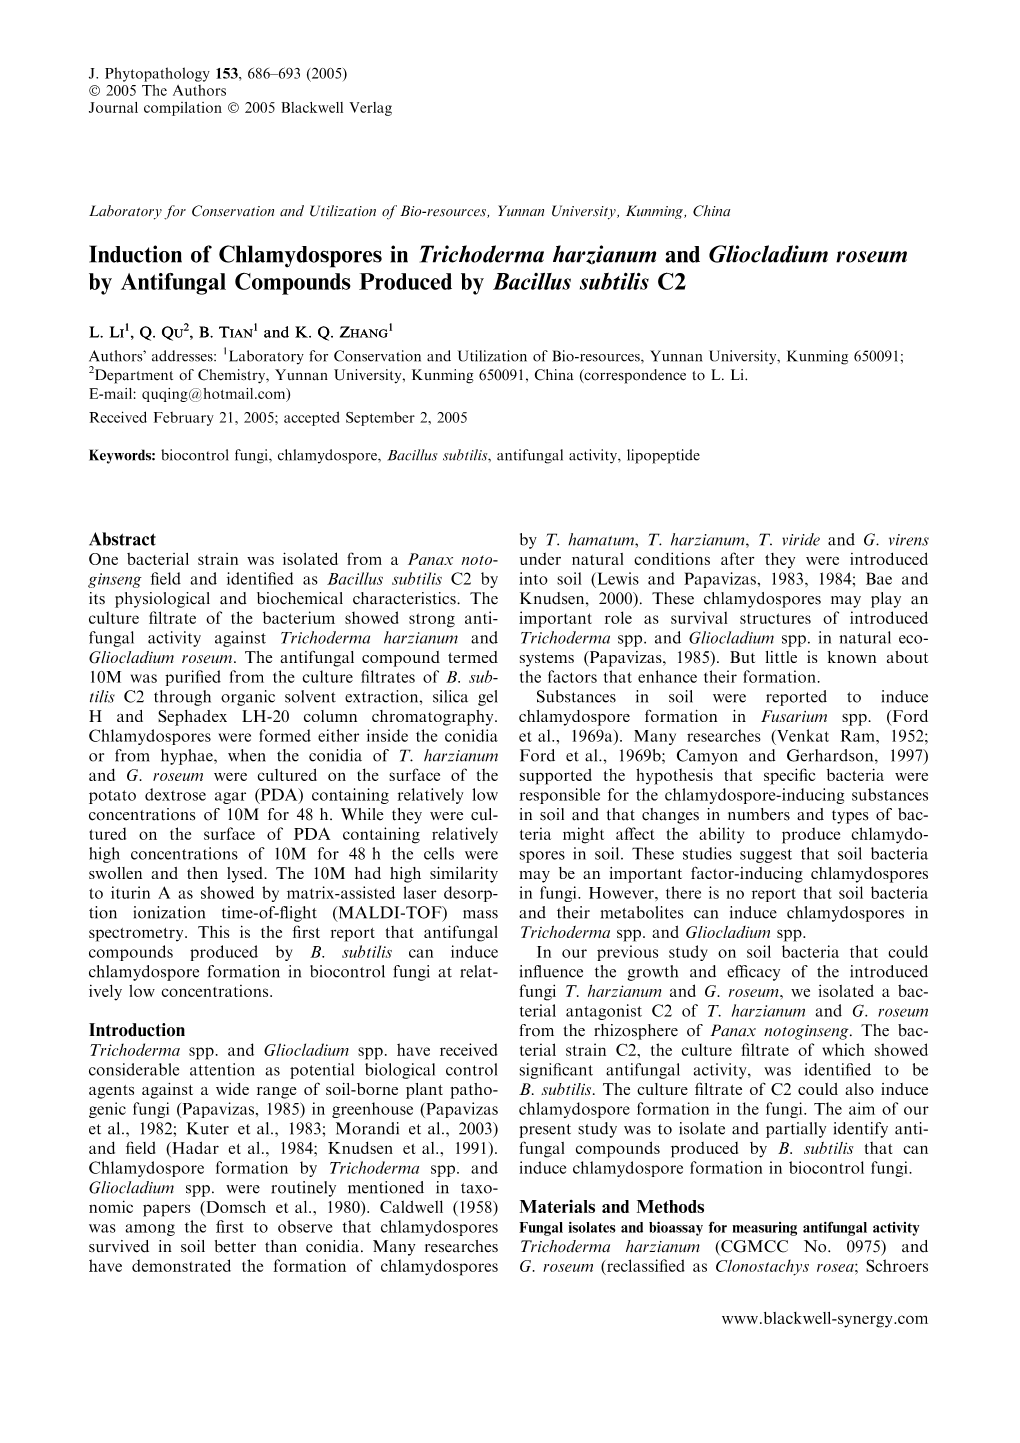 Induction of Chlamydospores in Trichoderma Harzianum and Gliocladium Roseum by Antifungal Compounds Produced by Bacillus Subtilis C2